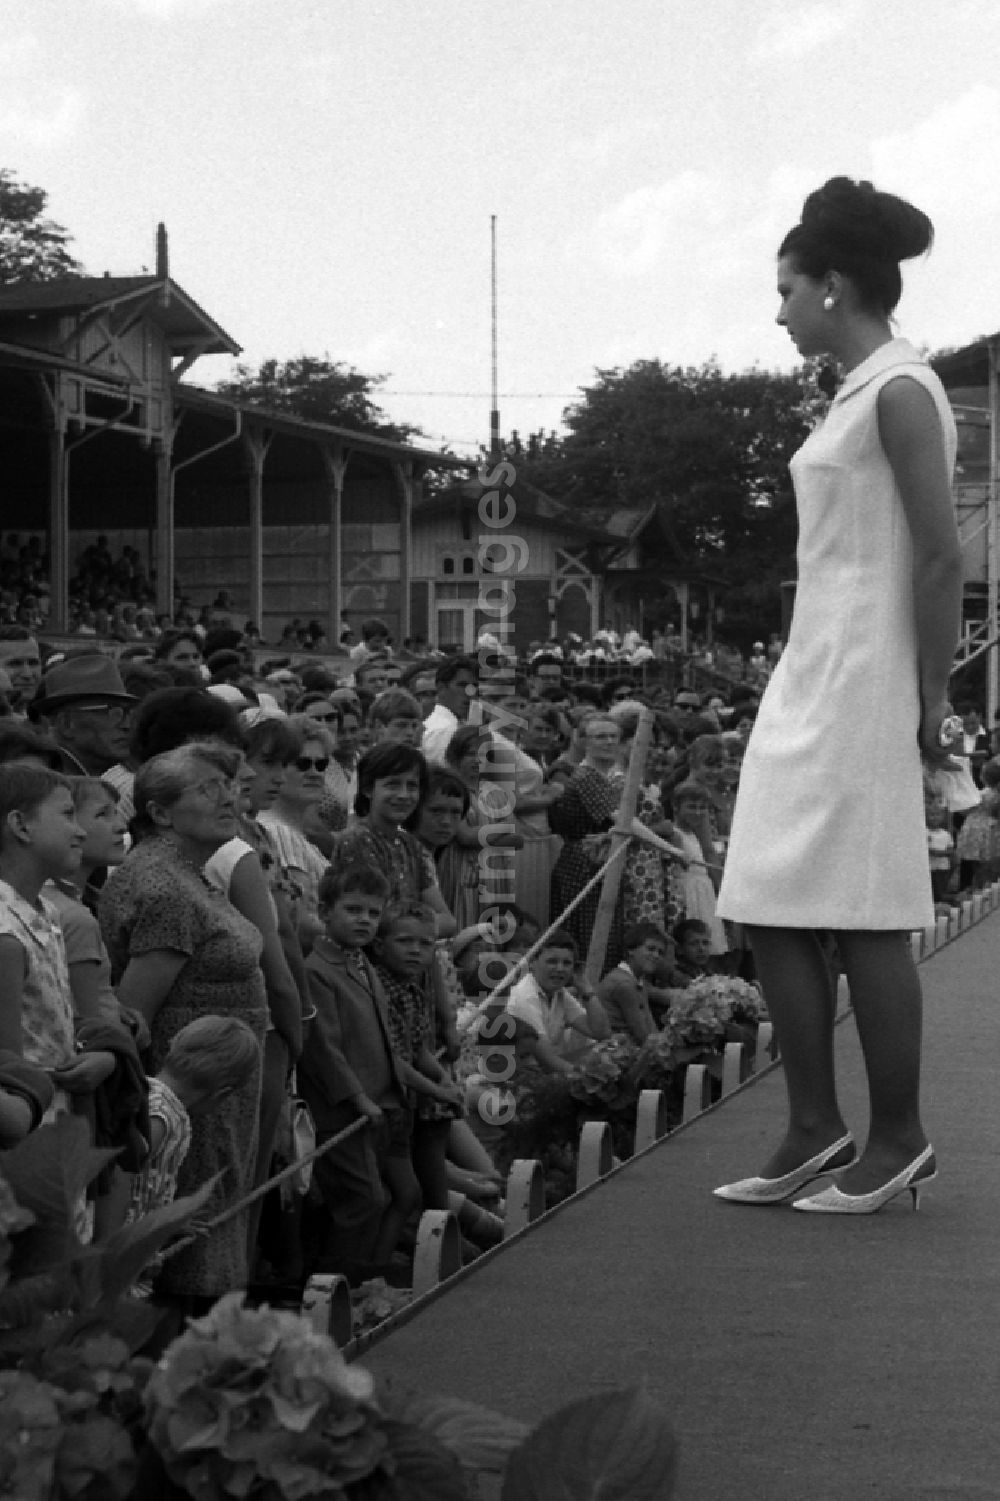 GDR picture archive: Dresden - Fashion show by the VVB Konfektion Berlin in front of the Tribuene on the fashion race day in Dresden in the state Saxony on the territory of the former GDR, German Democratic Republic